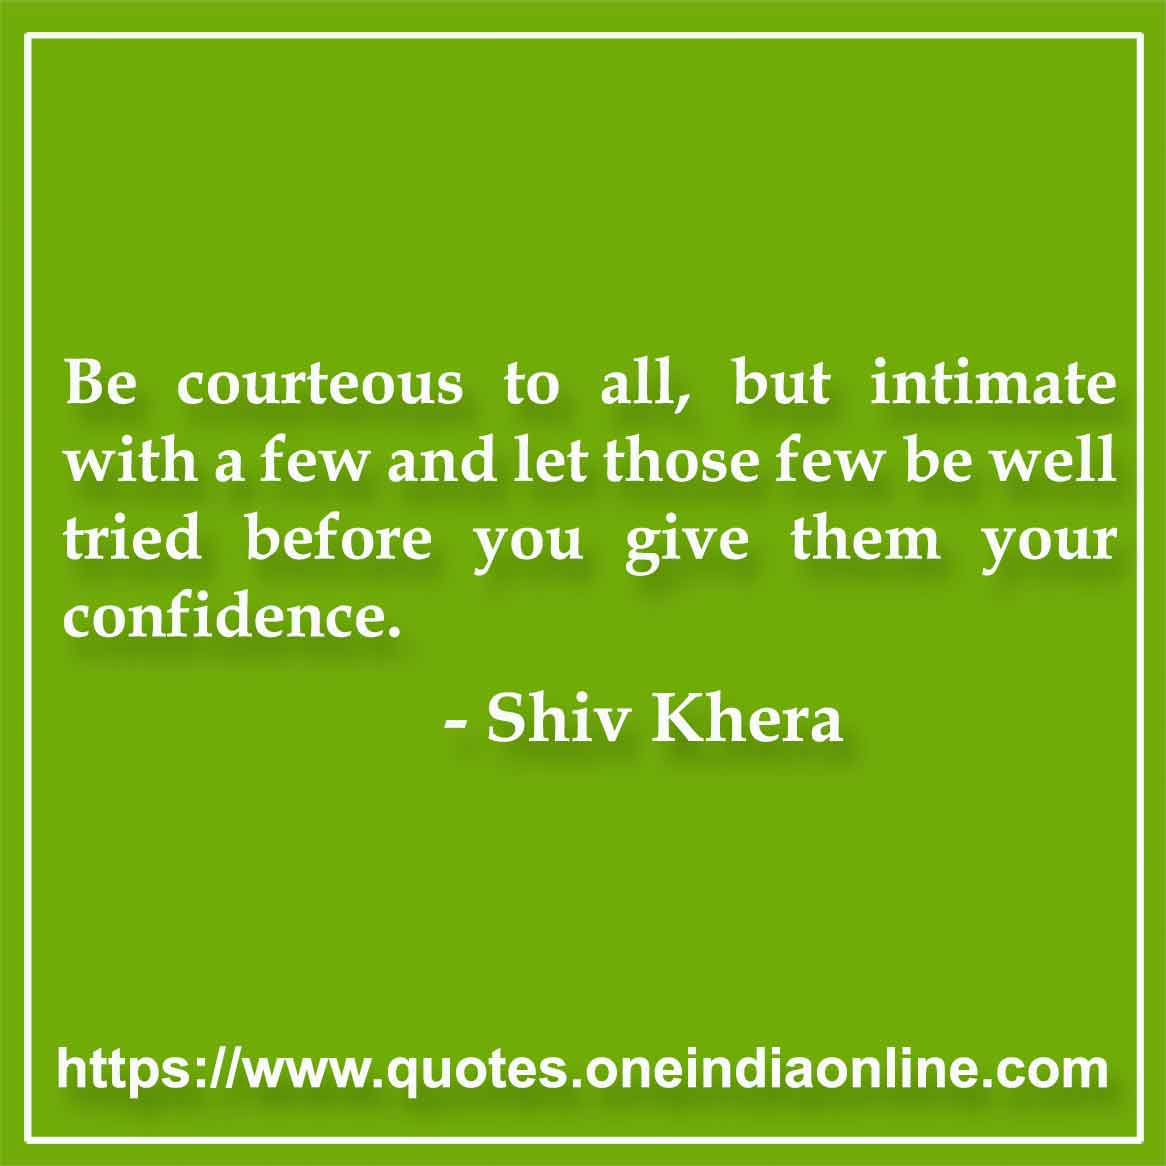 Famous Shiv Khera Quotes In English Quotations And Sayings 